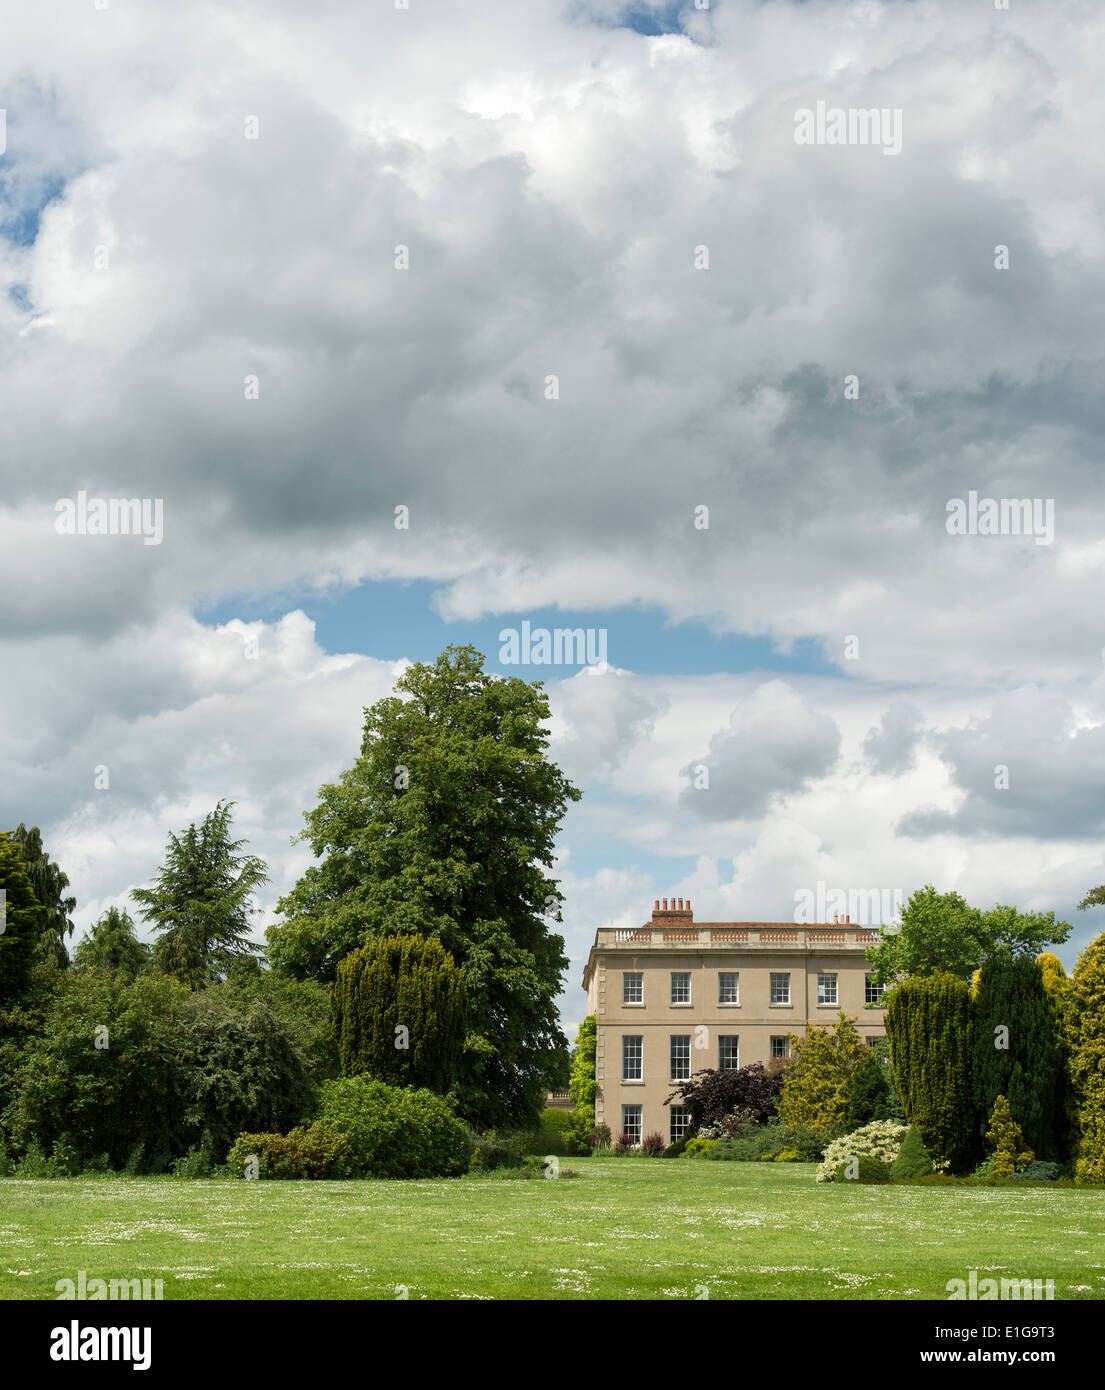 Waterperry House and gardens, Wheatley, l'Oxfordshire. L'Angleterre Banque D'Images